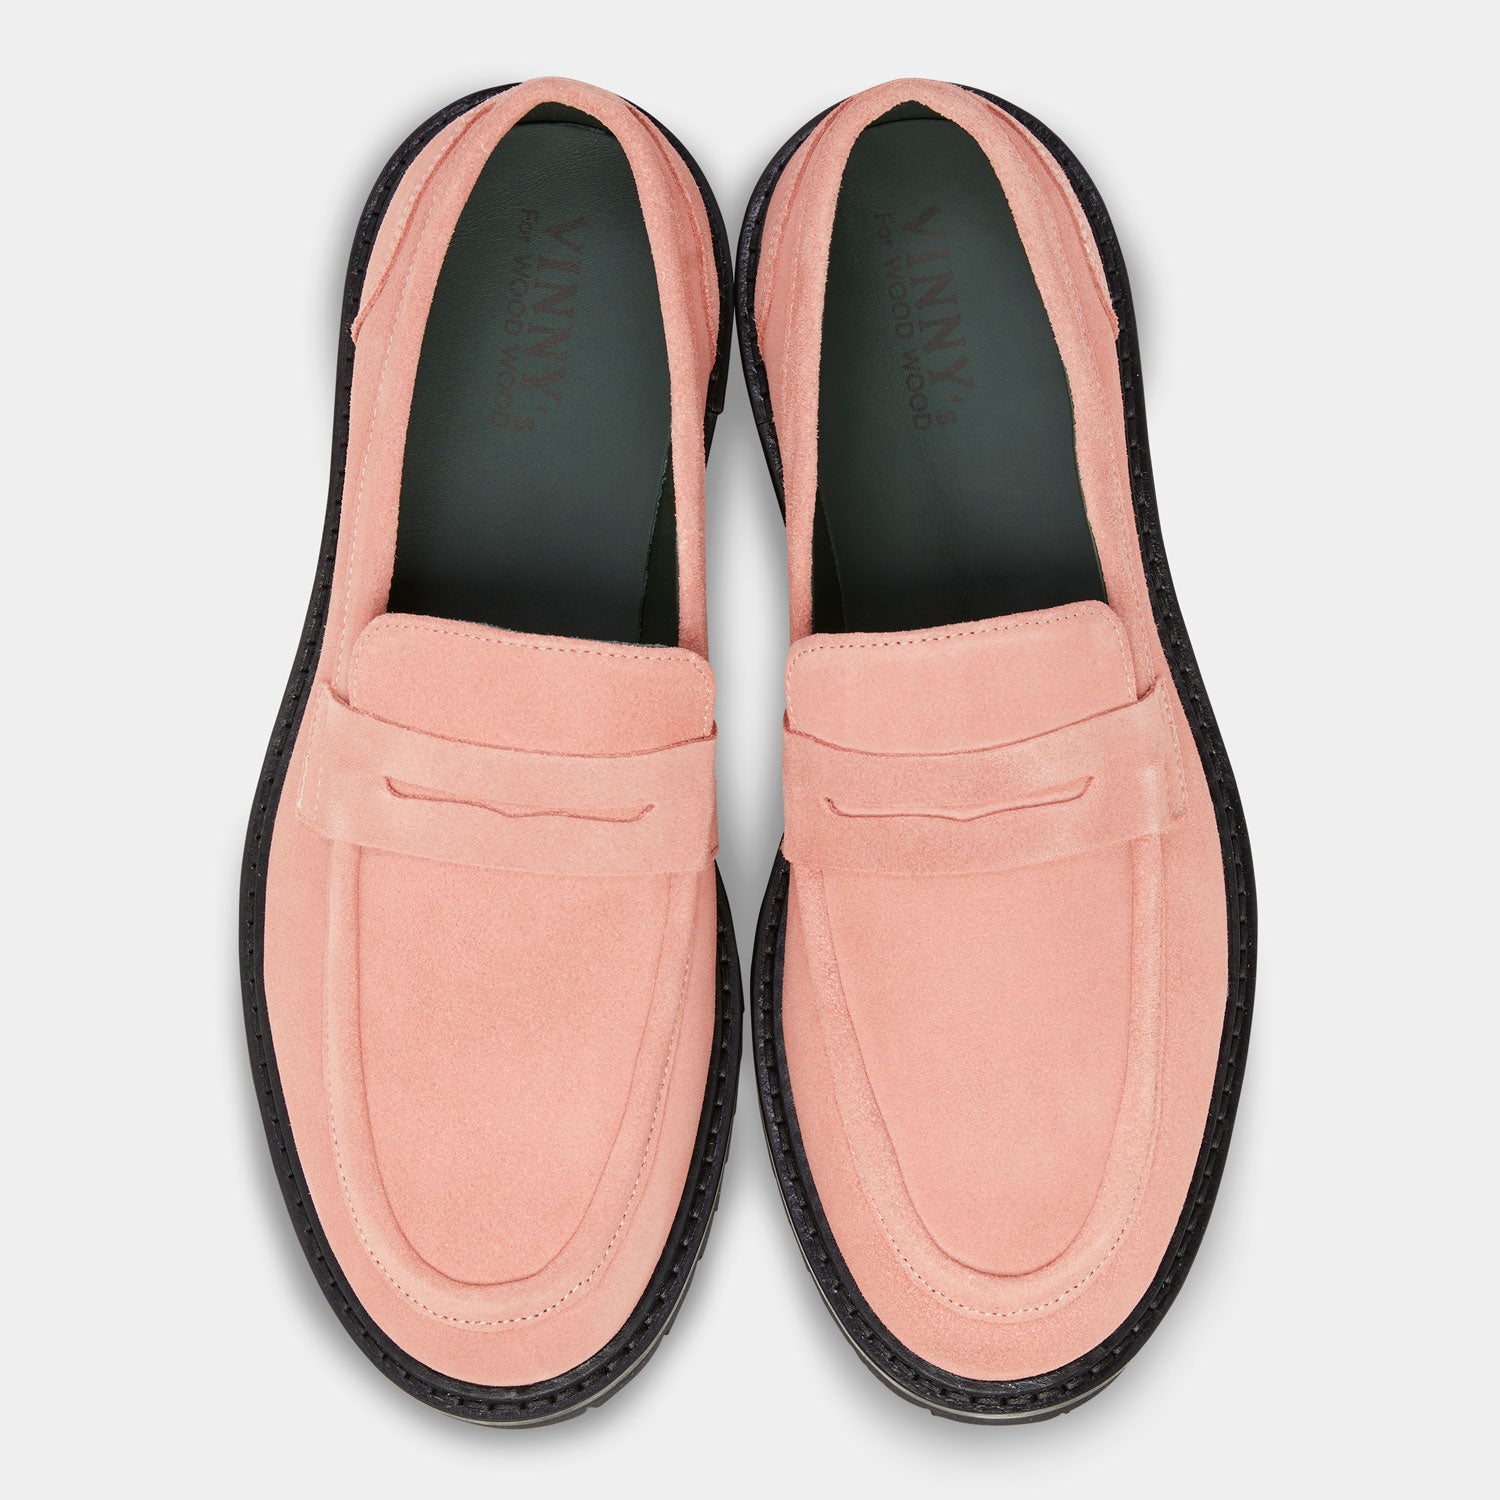 Richee Penny Loafer (Wood Wood & VINNY's)